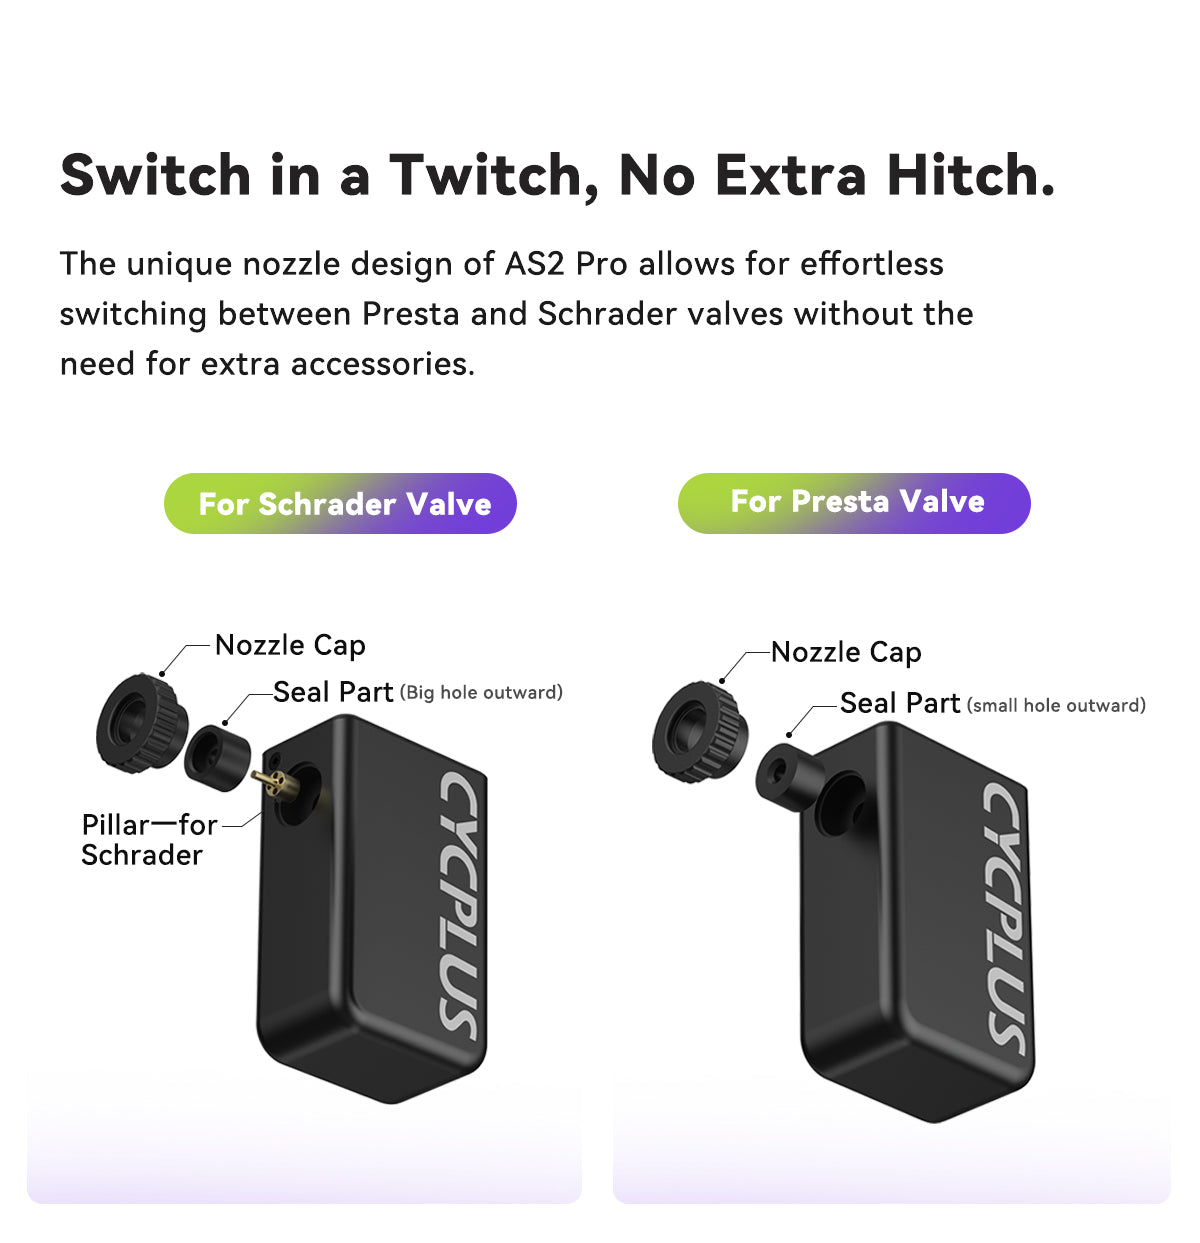 Switch in a Twitch, No Extra Hitch.  The unique nozzle design of AS2 Pro allows for effortless switching between Presta and Schrader valves without the need for extra accessories.